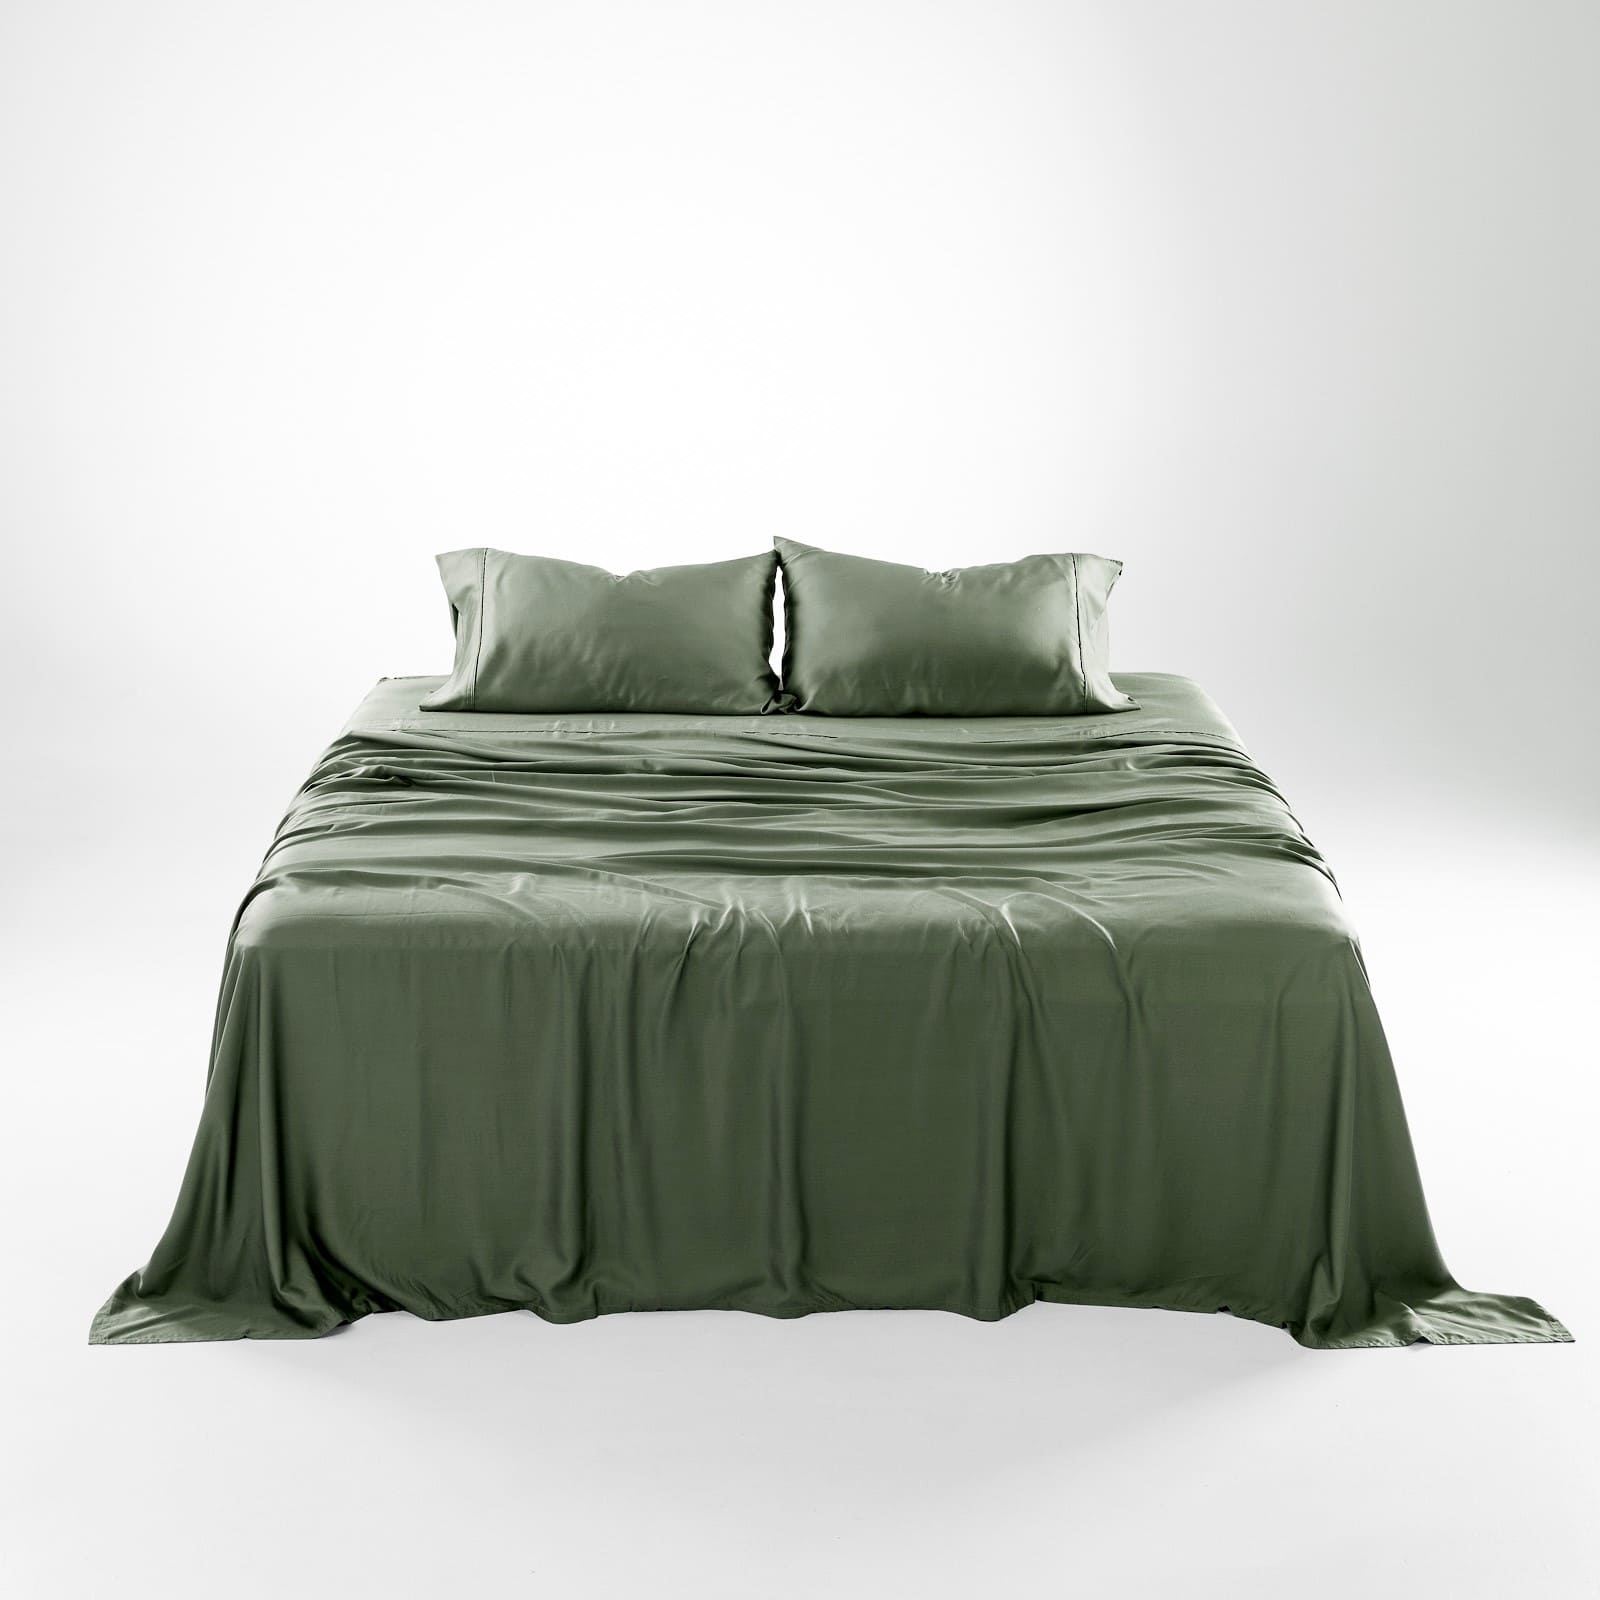 Olive + Crate Sheets - Eucalyptus Cooling Sheets for Hot Sleepers & Night Sweats, Cal King / Stone Gray